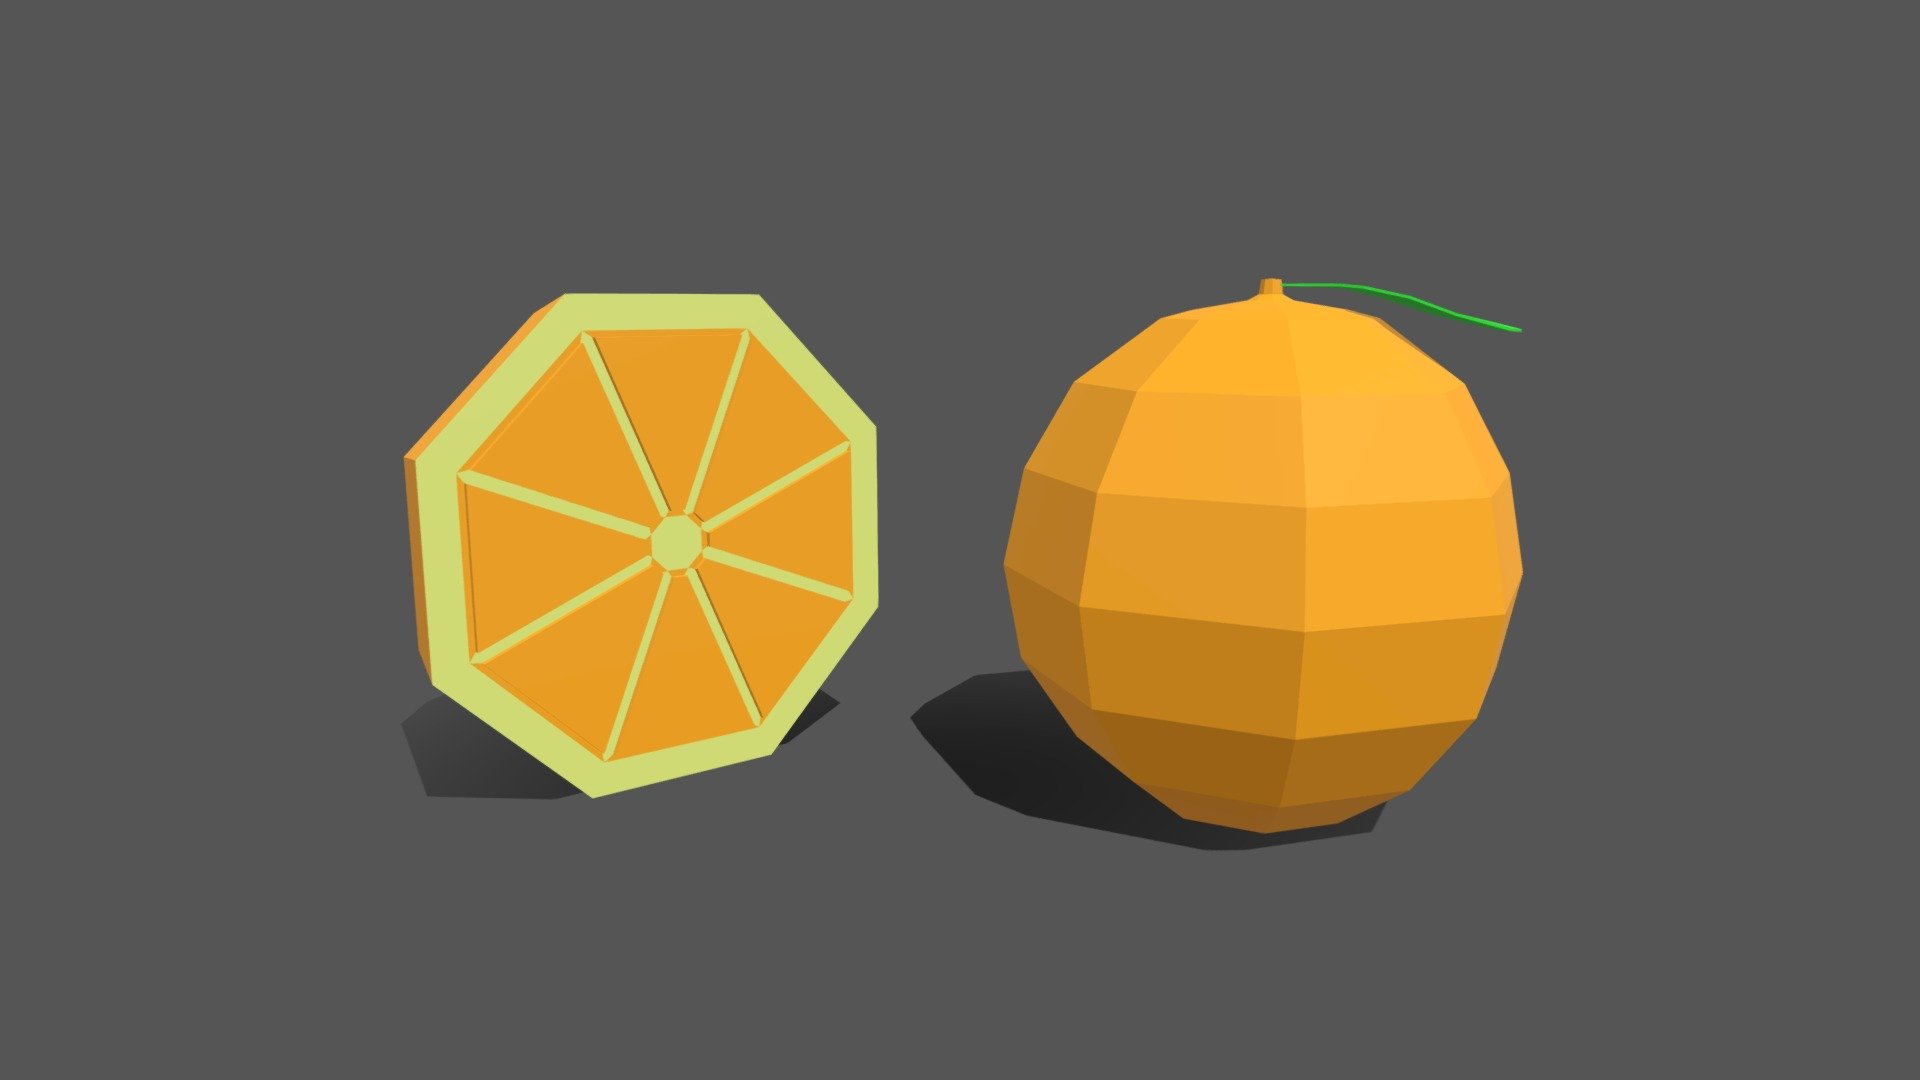 This is a low poly 3d model of an orange. The low poly orange was modelled and prepared for low-poly style renderings, background, general CG visualization. 

The 3d orange model is presented as 2 meshes. Meshes are quads only. Verts : 262 Faces: 258

Orange : Verts 148 Faces 146, Half Orange: Verts 114 Faces 112

Simple diffuse colors.

No maps and no UVW mapping is available.

The original file was created in blender. You will receive a 3DS, OBJ, FBX, blend, DAE, STL.

All preview images were rendered with Blender Cycles. Product is ready to render out-of-the-box. Please note that the lights, cameras, and background is only included in the .blend file. The model is clean and alone in the other provided files, centred at origin and has real-world scale 3d model